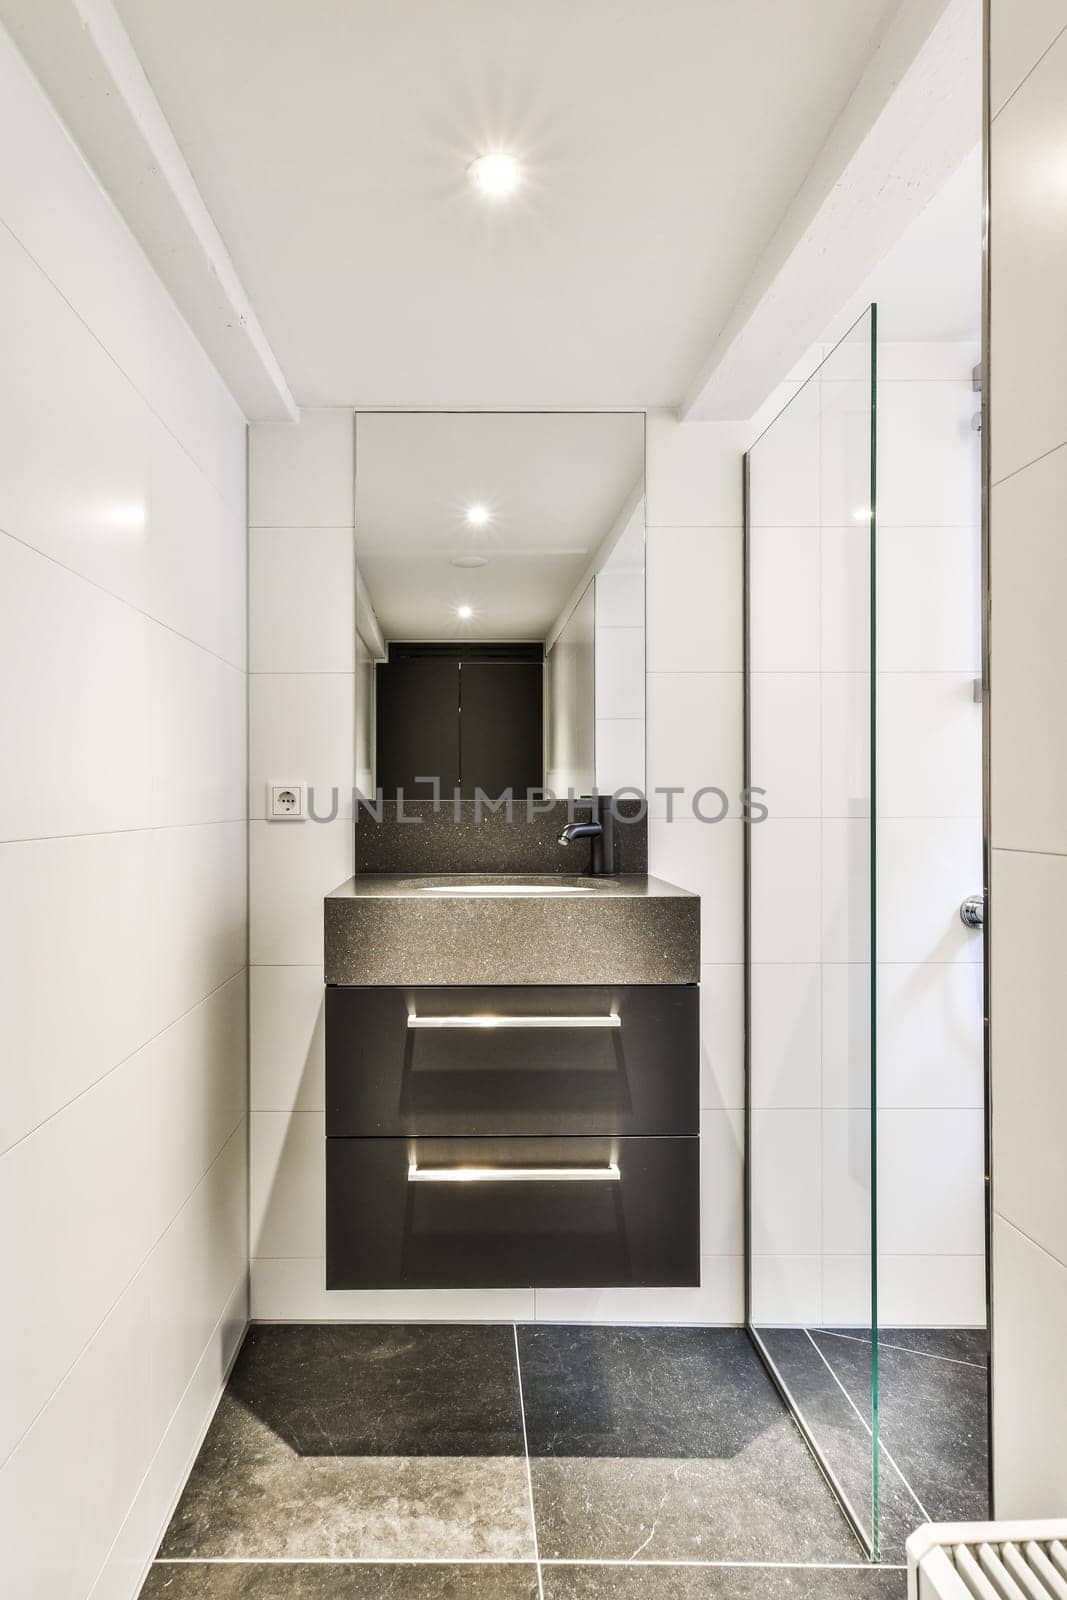 a modern bathroom with black and white tiles on the floor, shower stall and toilet in the corner is illuminated by recessed lights